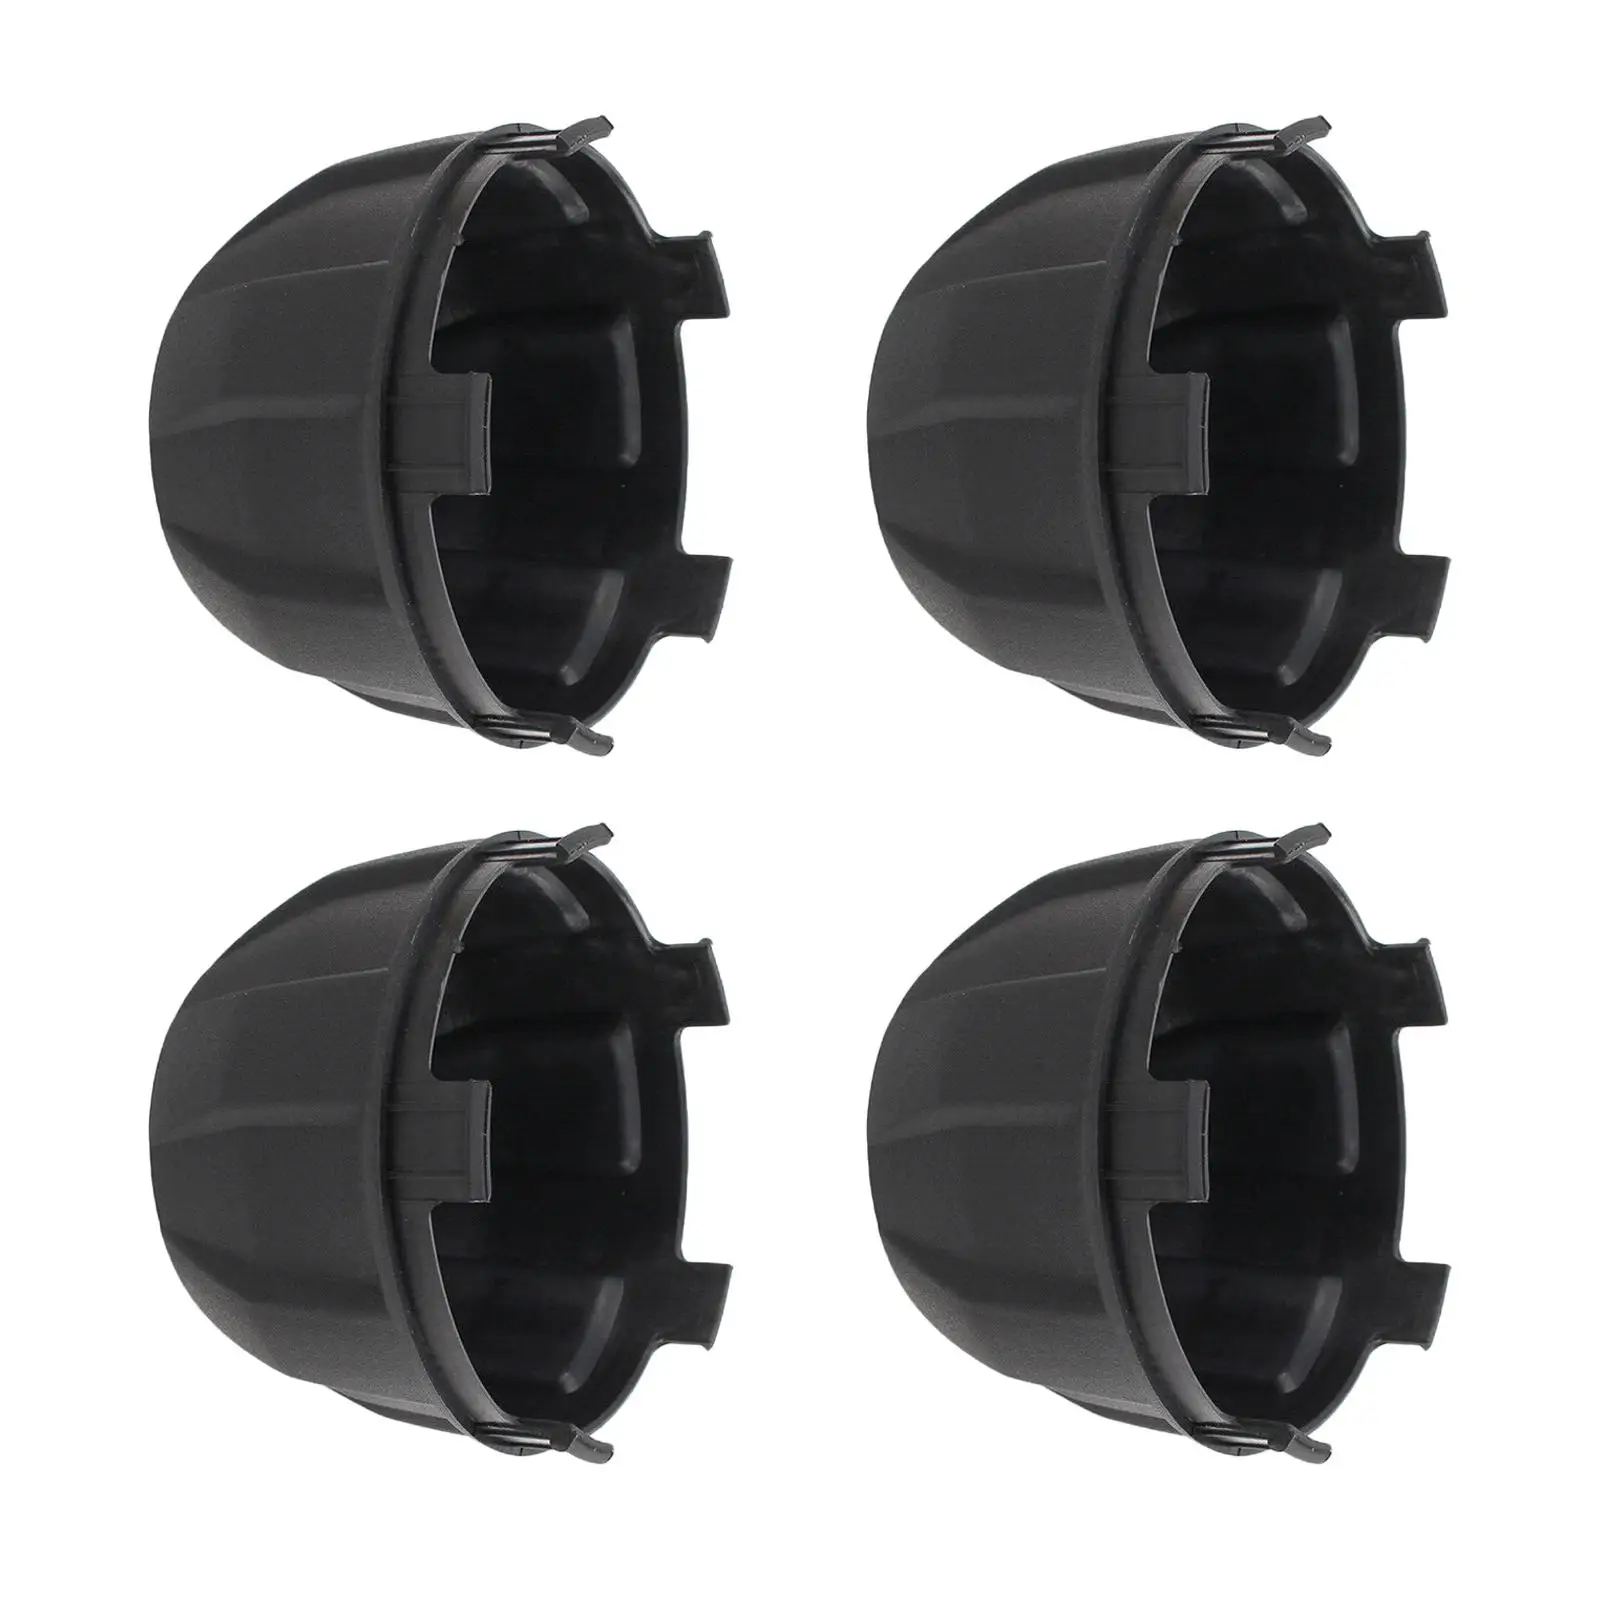 4 Pieces Wheel Center Hub Caps Motorcycle 11065-1341 for Kawasaki Repairing Accessory Easily Install Stable Performance premium